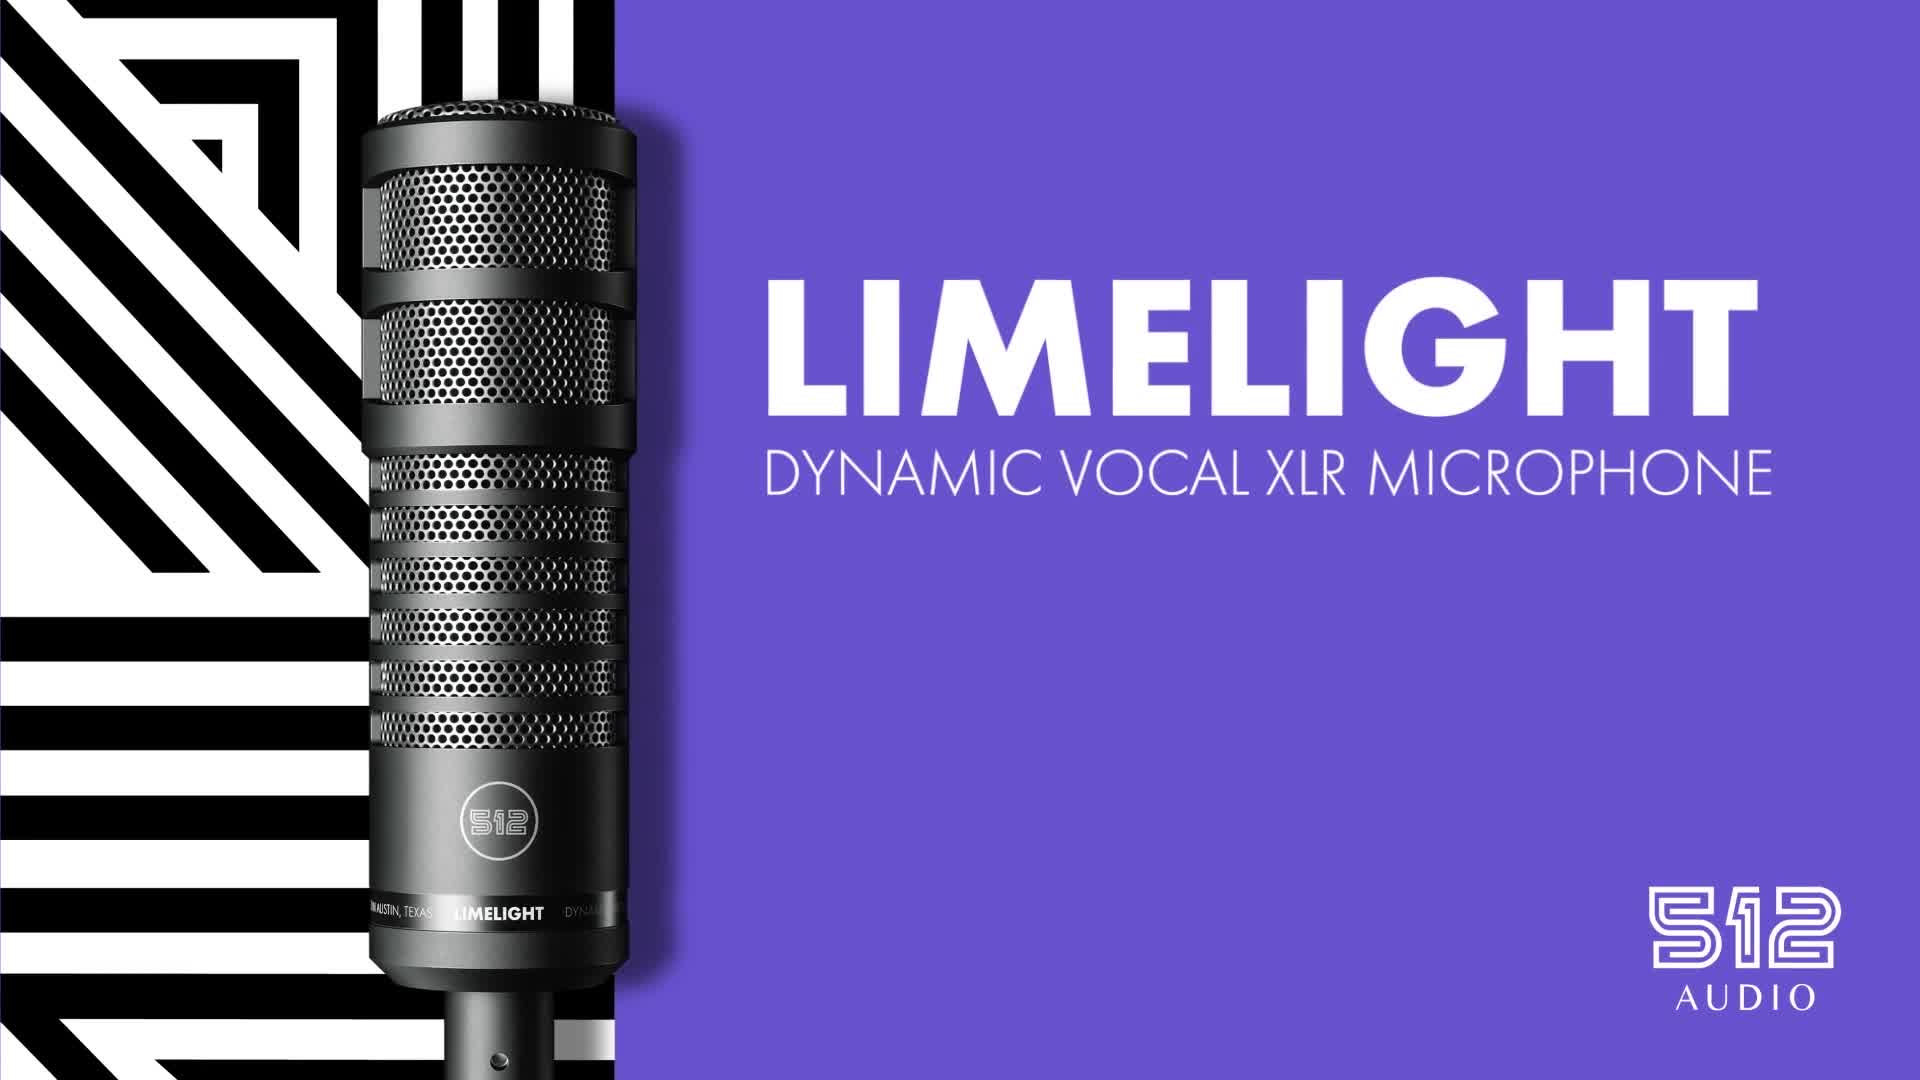 Introduction to Limelight Mic